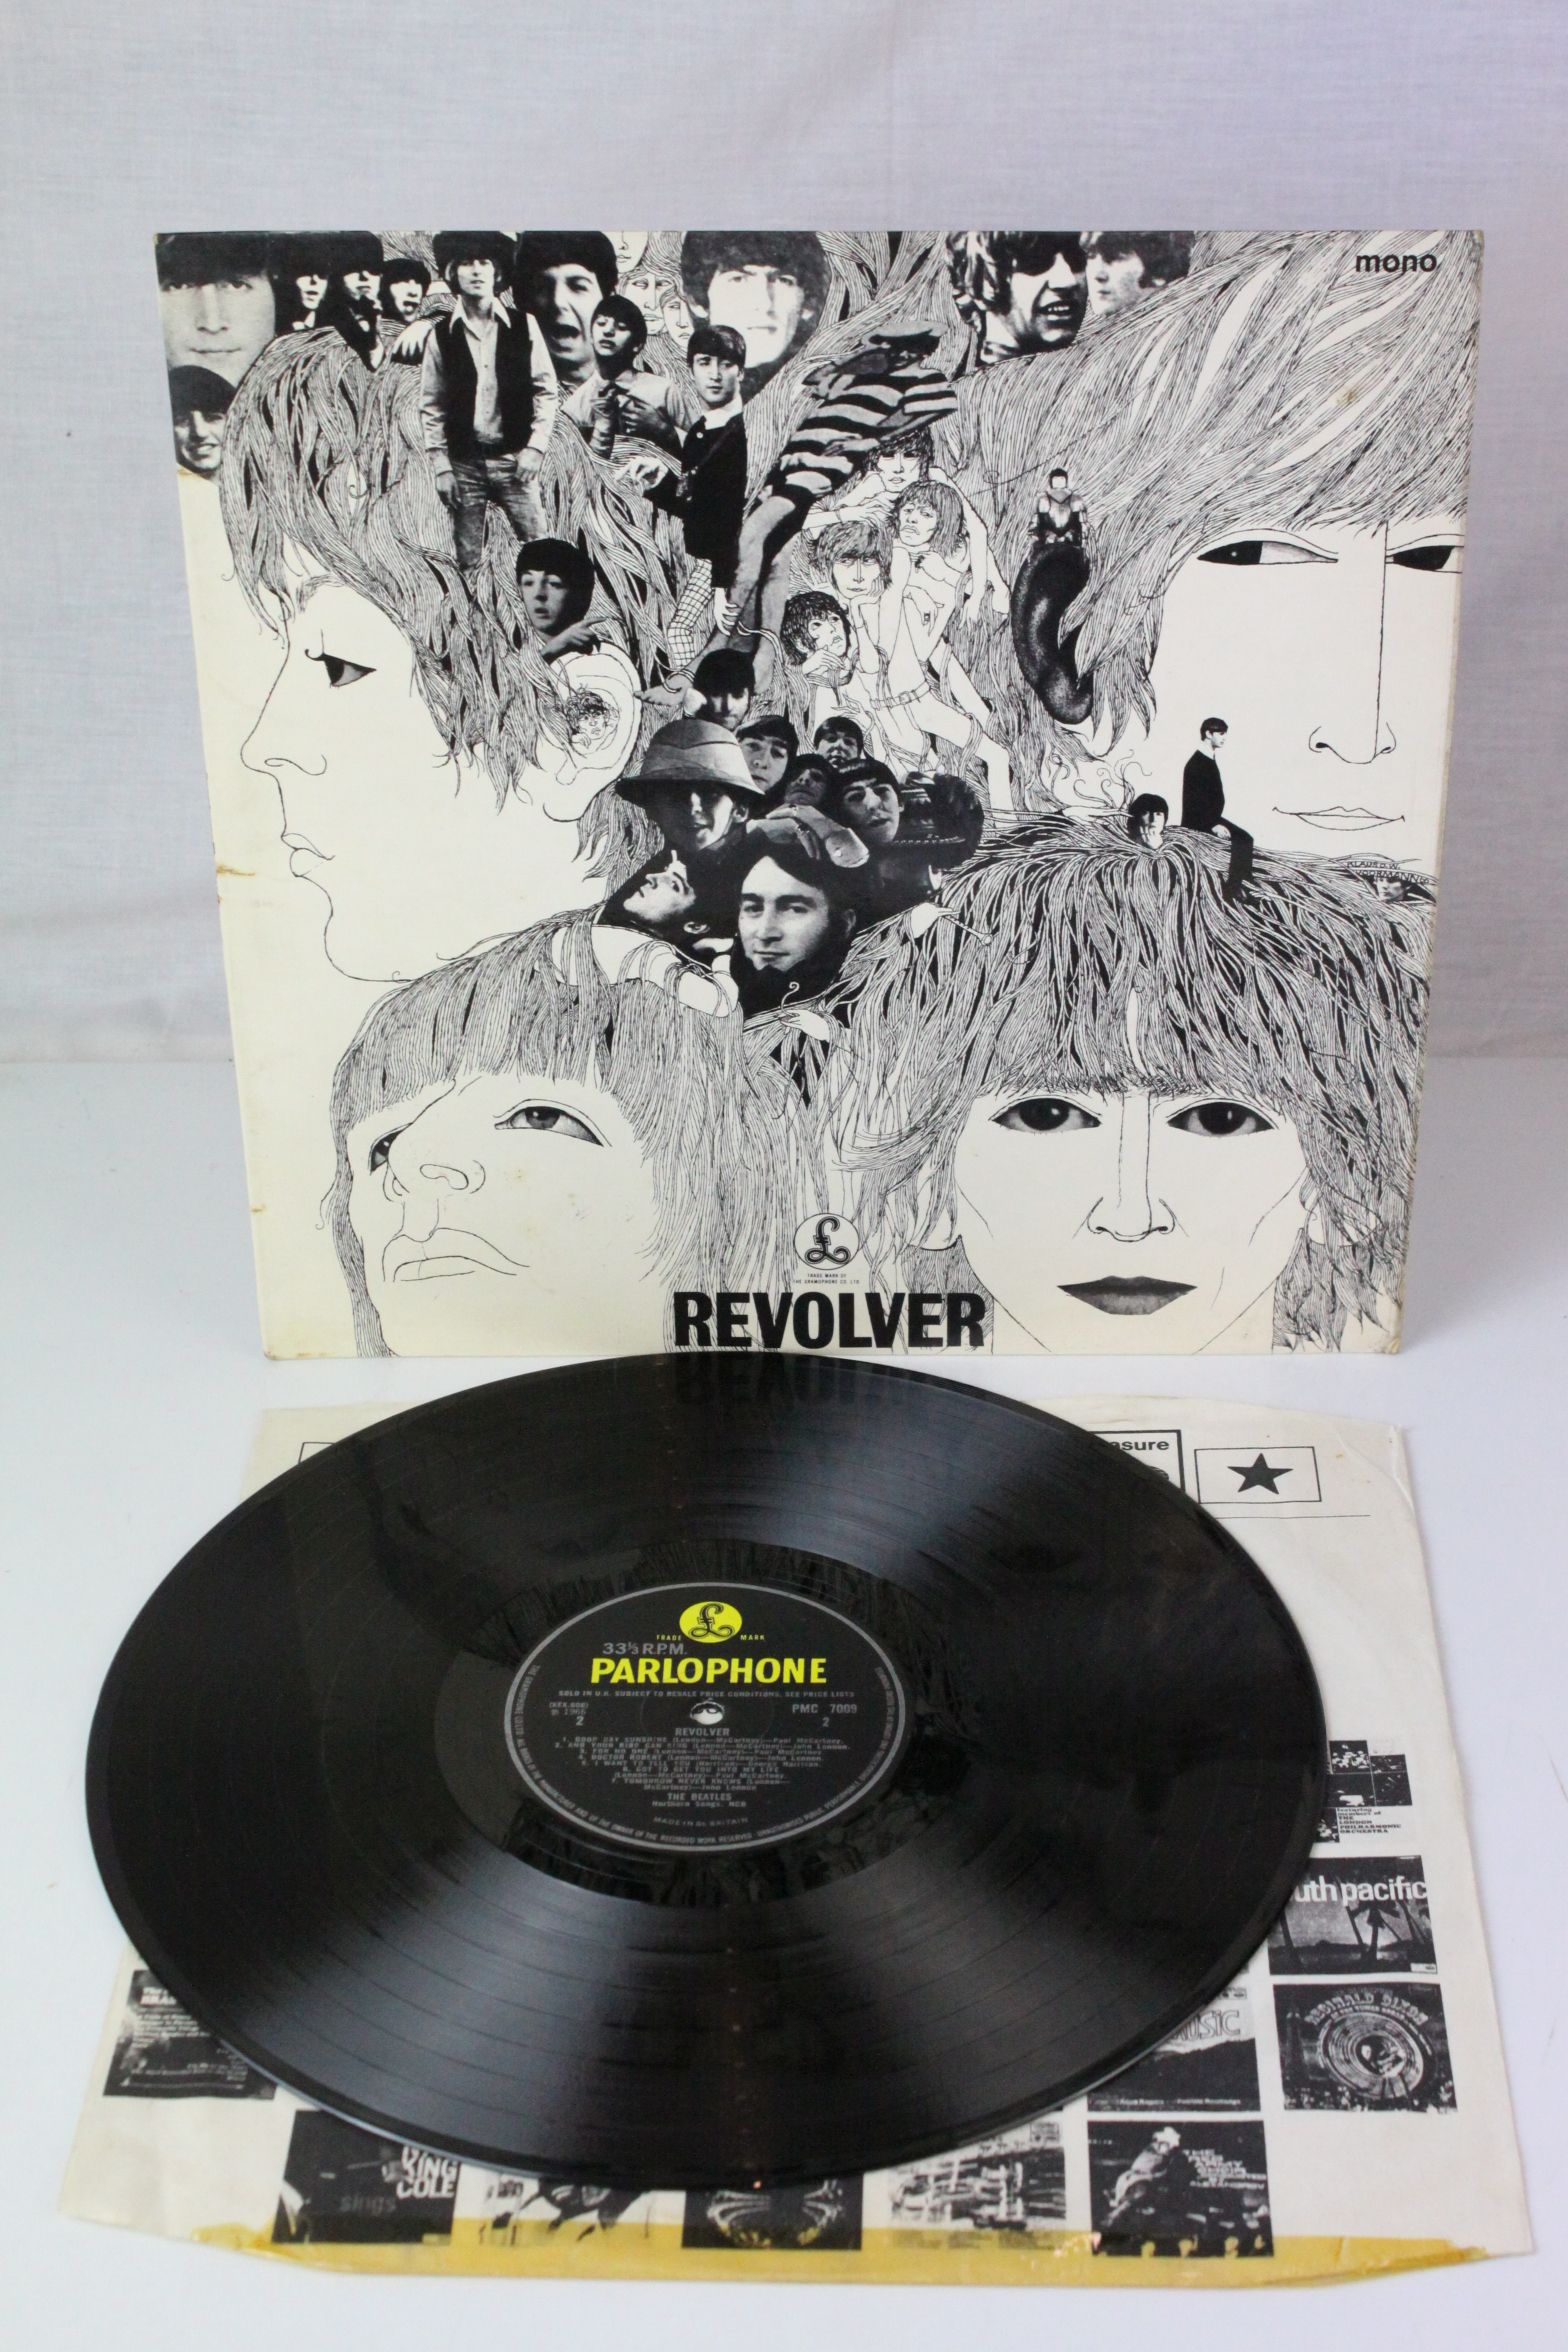 Vinyl - Four The Beatles LPs to include For Sale PMC1240 mono, Revolver PMC7009 mono, With The - Image 4 of 21